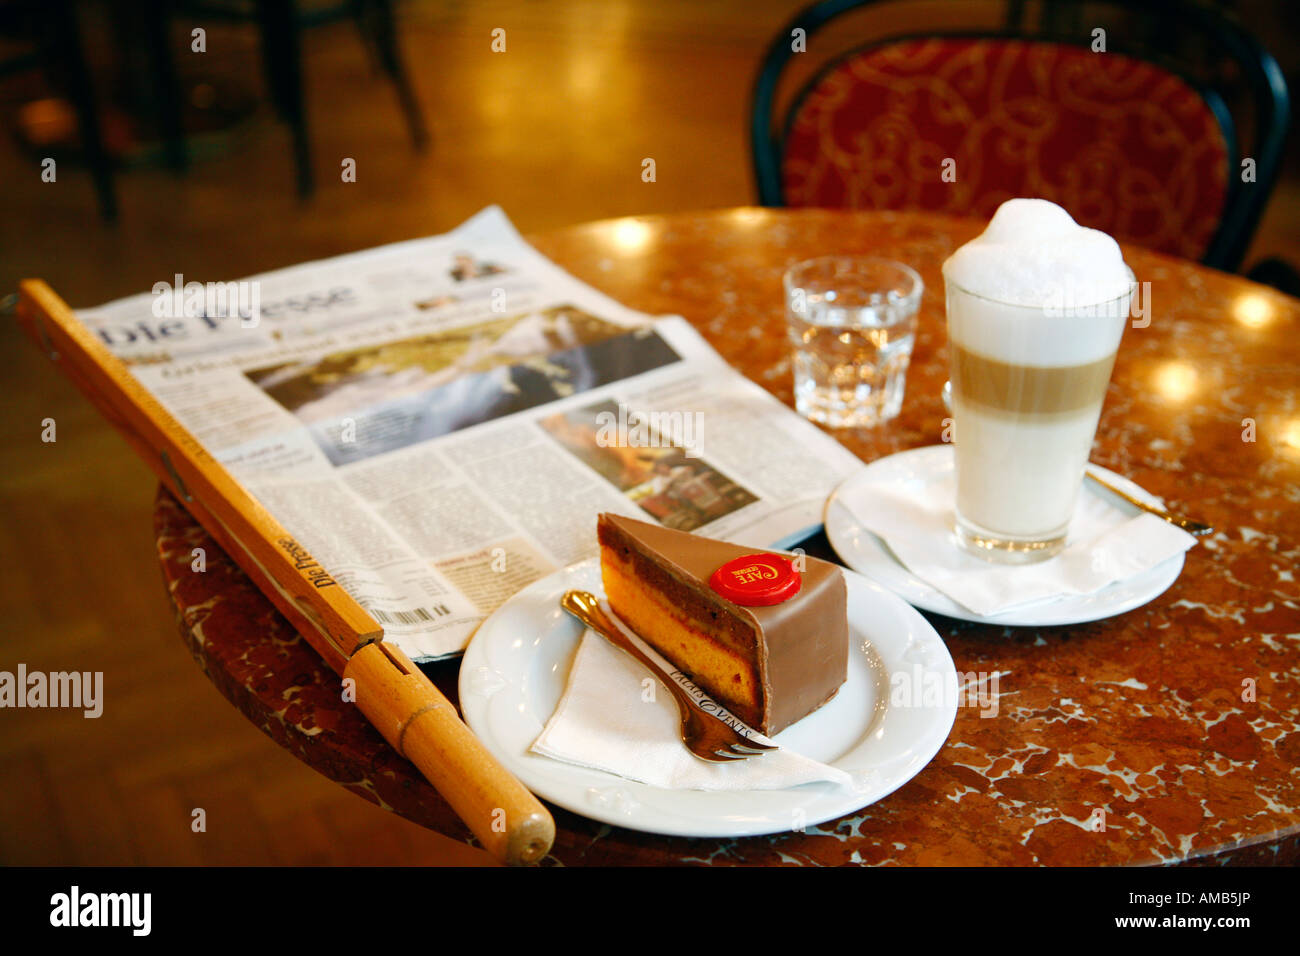 Aug 2008 - Coffee and cake at the famous Cafe Central Vienna Austria Stock Photo